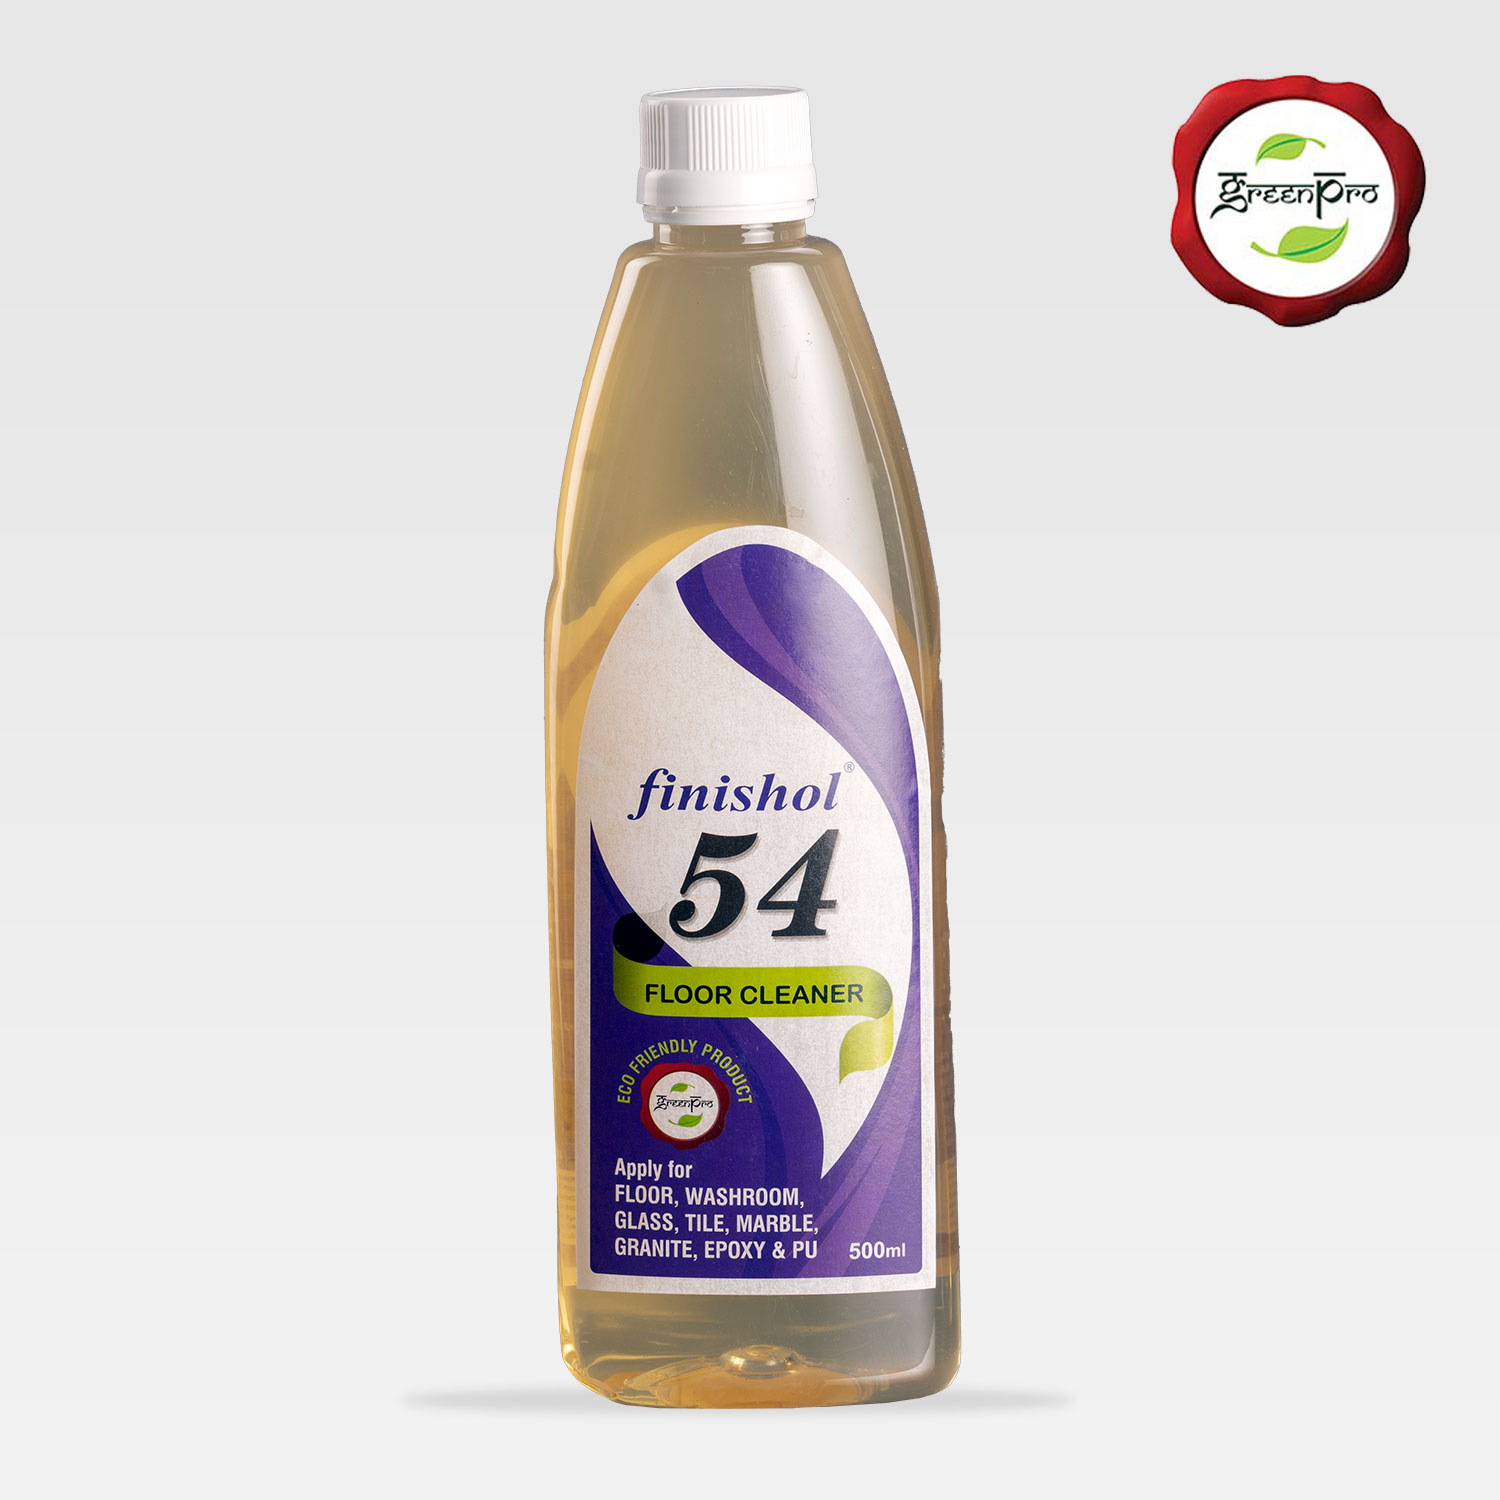 Non-toxic Disinfectant Floor Cleaner - Finishol 54